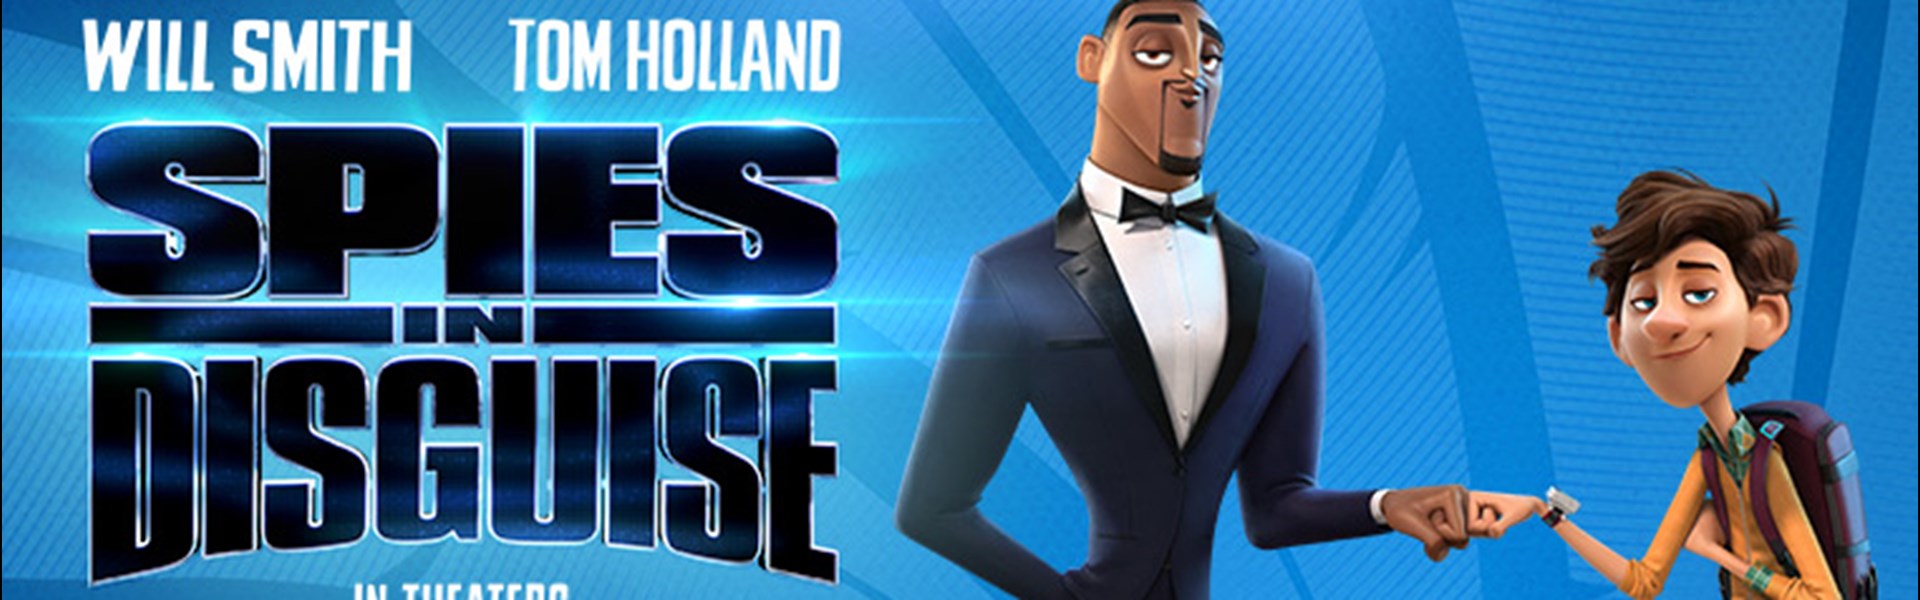 FILM: Spies In Disguise